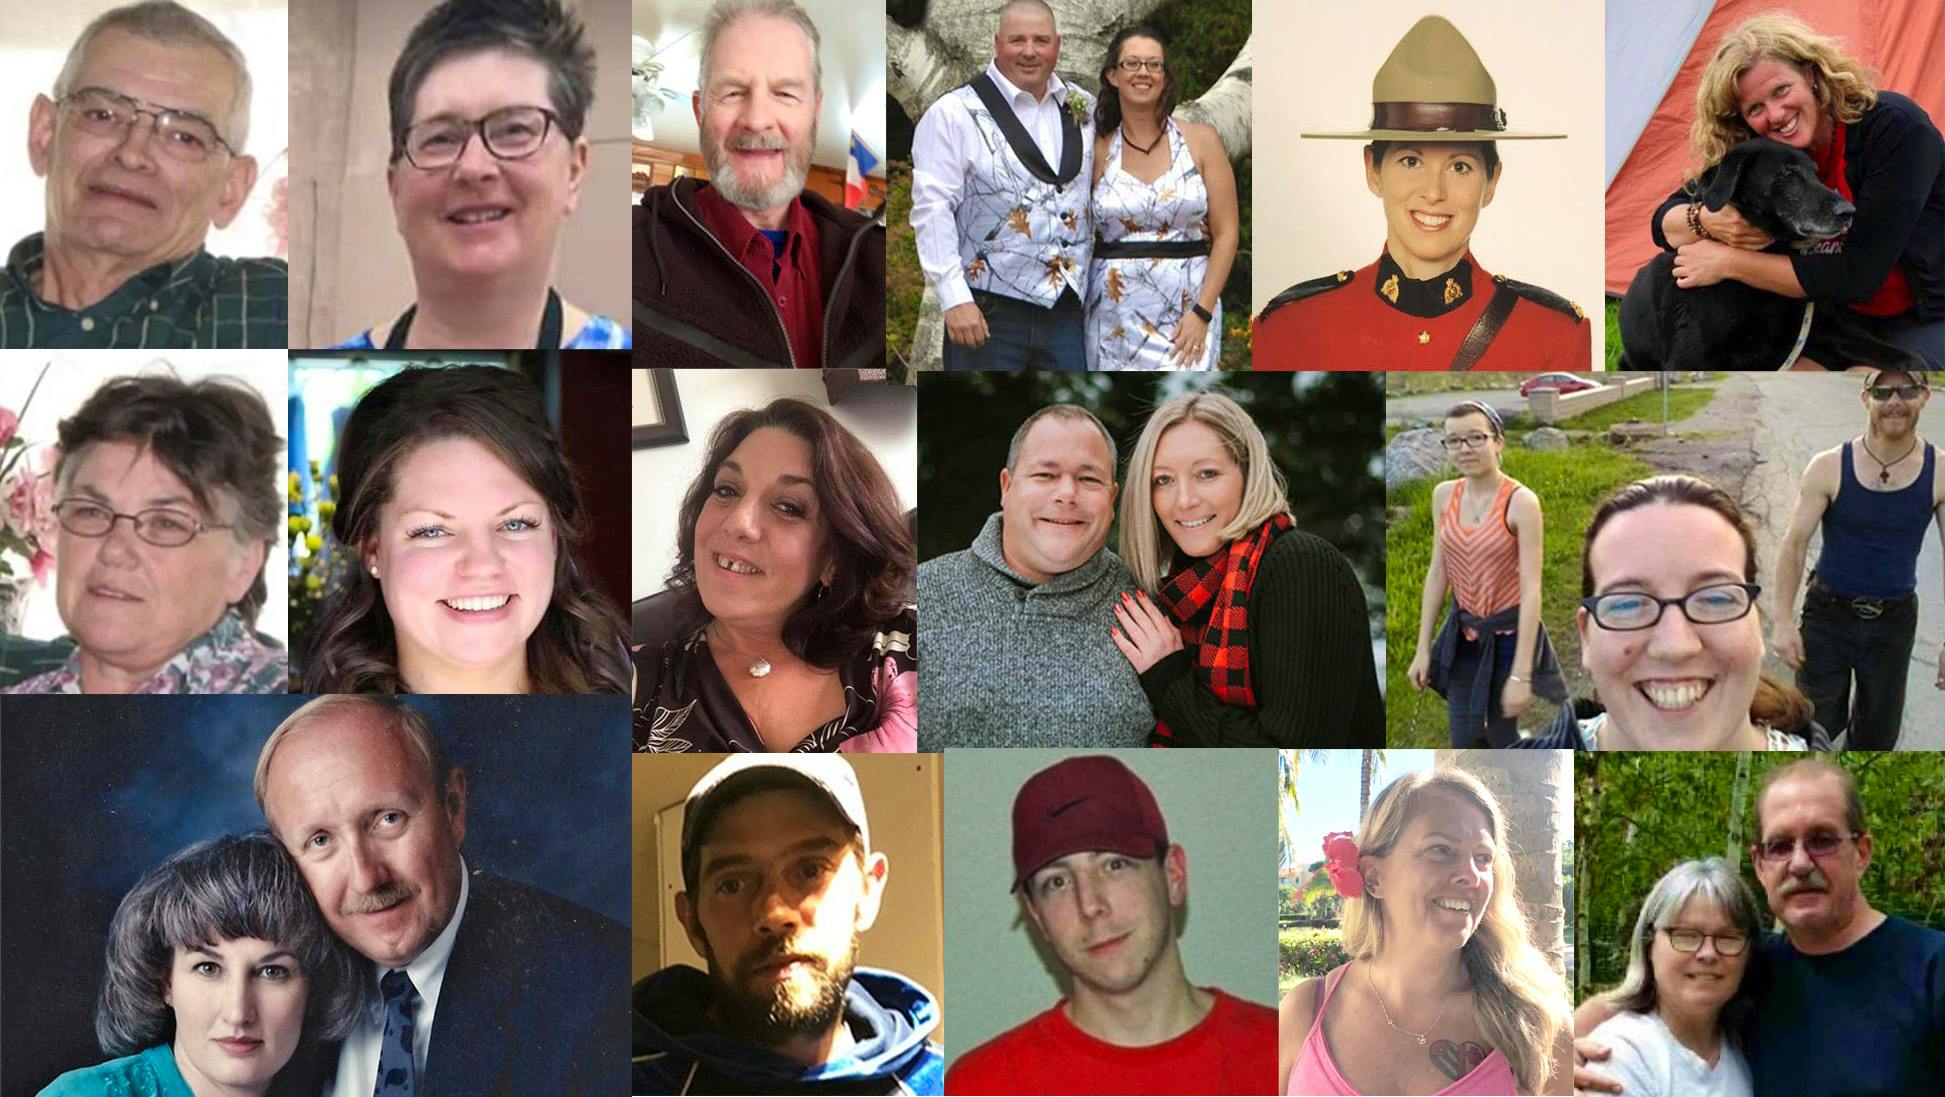 The 22 victims of a mass shooting in Nova Scotia on April 18 and 19, 2020. From left to right: Top row: Peter Bond, Lillian Campbell, Tom Bagley, Greg and Jamie Blair, Const. Heidi Stevenson and Lisa McCully. Middle row: Joy Bond, Kristen Beaton, Heather O'Brien, Sean McLeod, Alanna Jenkins, Emily Tuck, Jolene Oliver and Aaron (Friar) Tuck. Bottom row: Joanne Thomas, John Zahl, Joey Webber, Corrie Ellison, Gina Goulet and Dawn and Frank Gulenchyn.